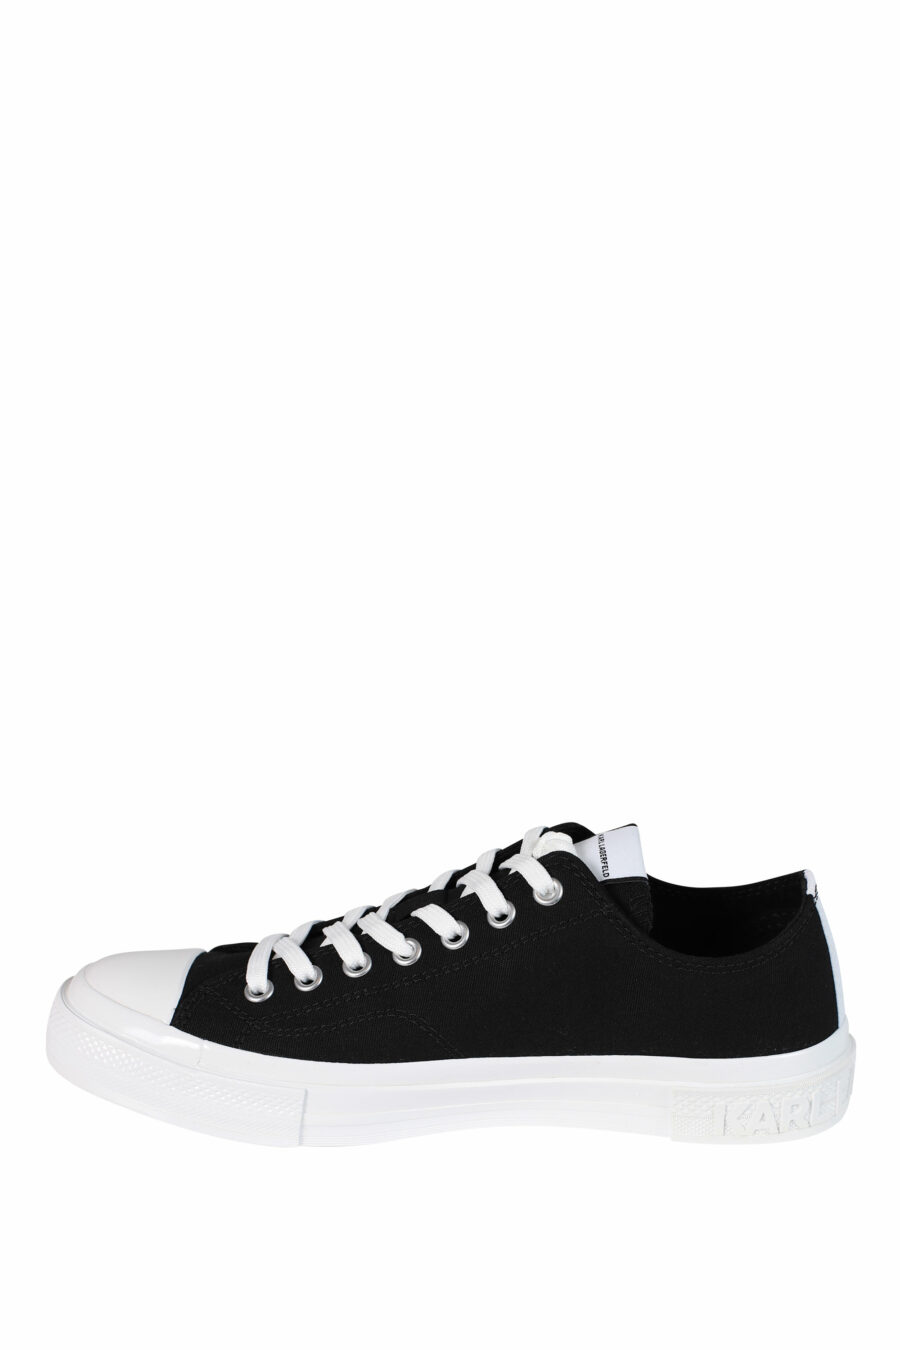 Black trainers with "karl" logo and white sole - 5059529249655 3